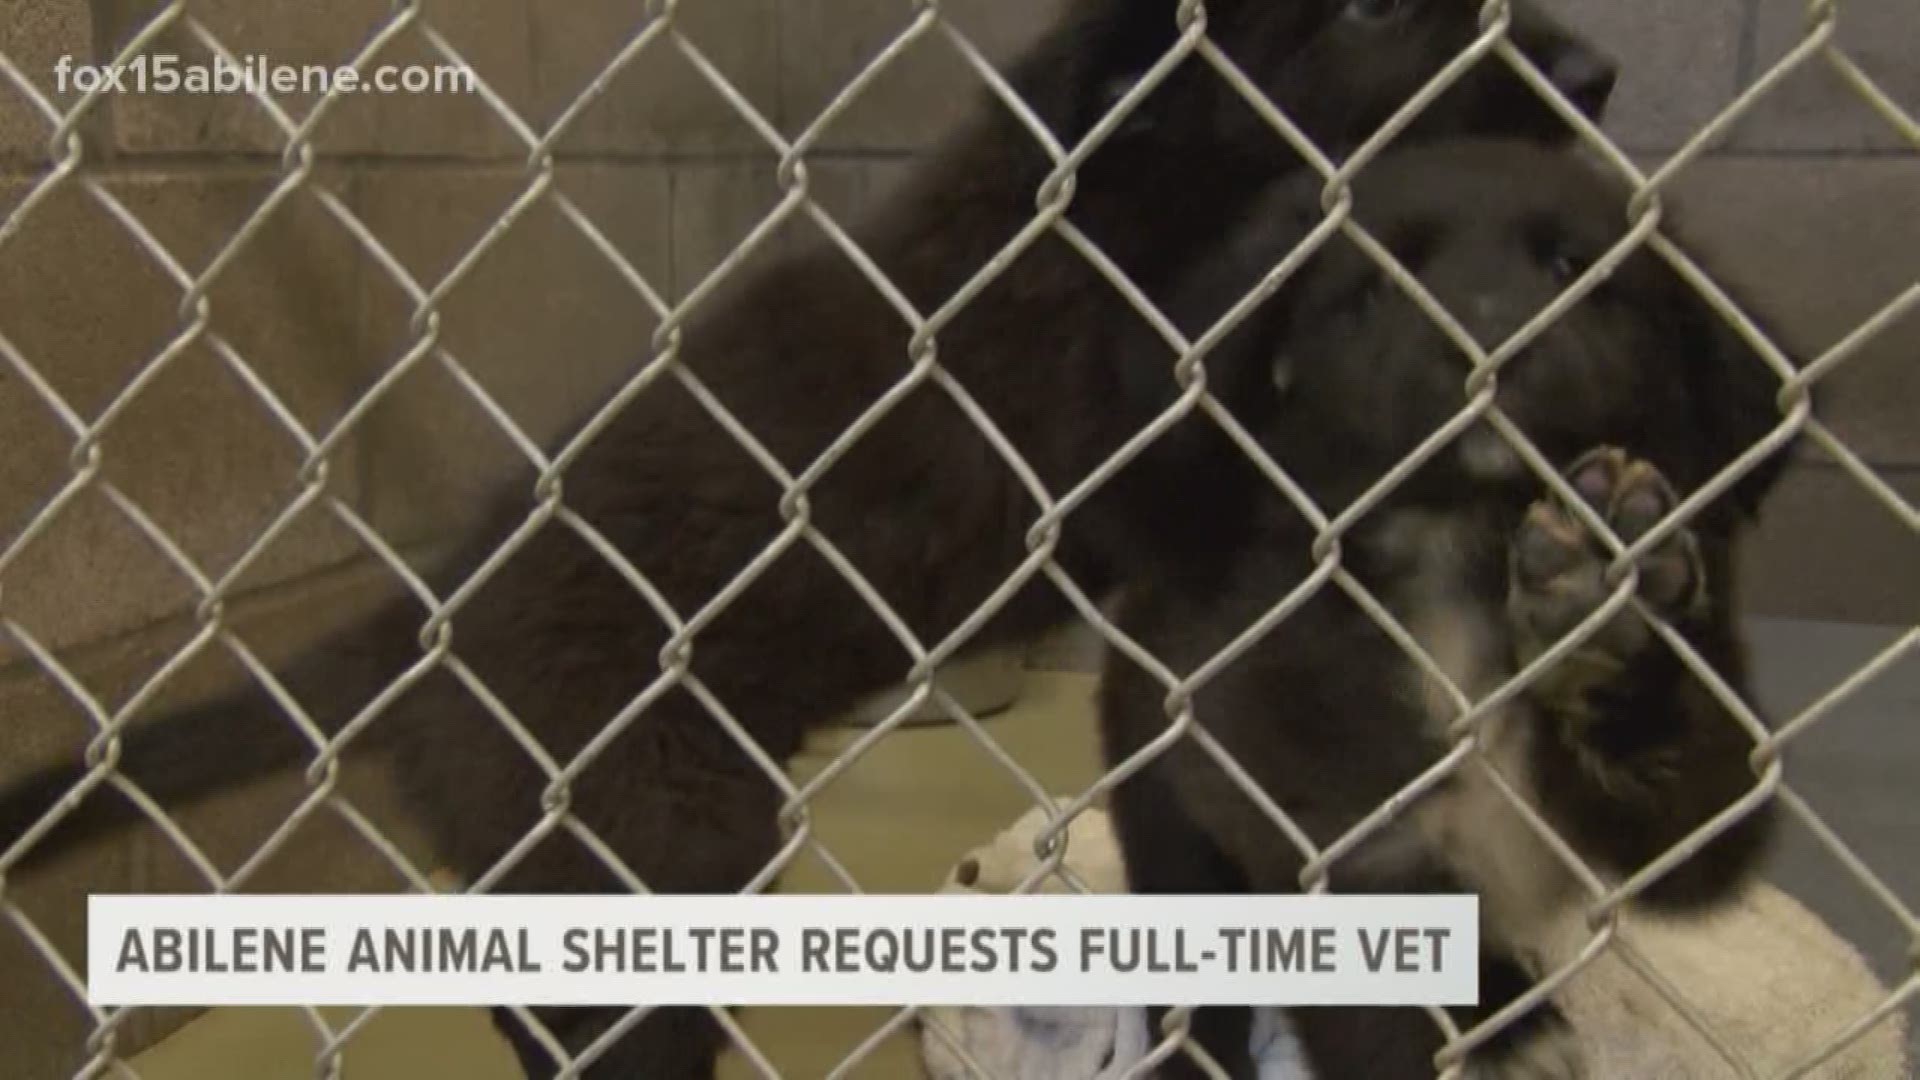 Abilene Animal Services director requests a full-time vet and vet tech for shelter